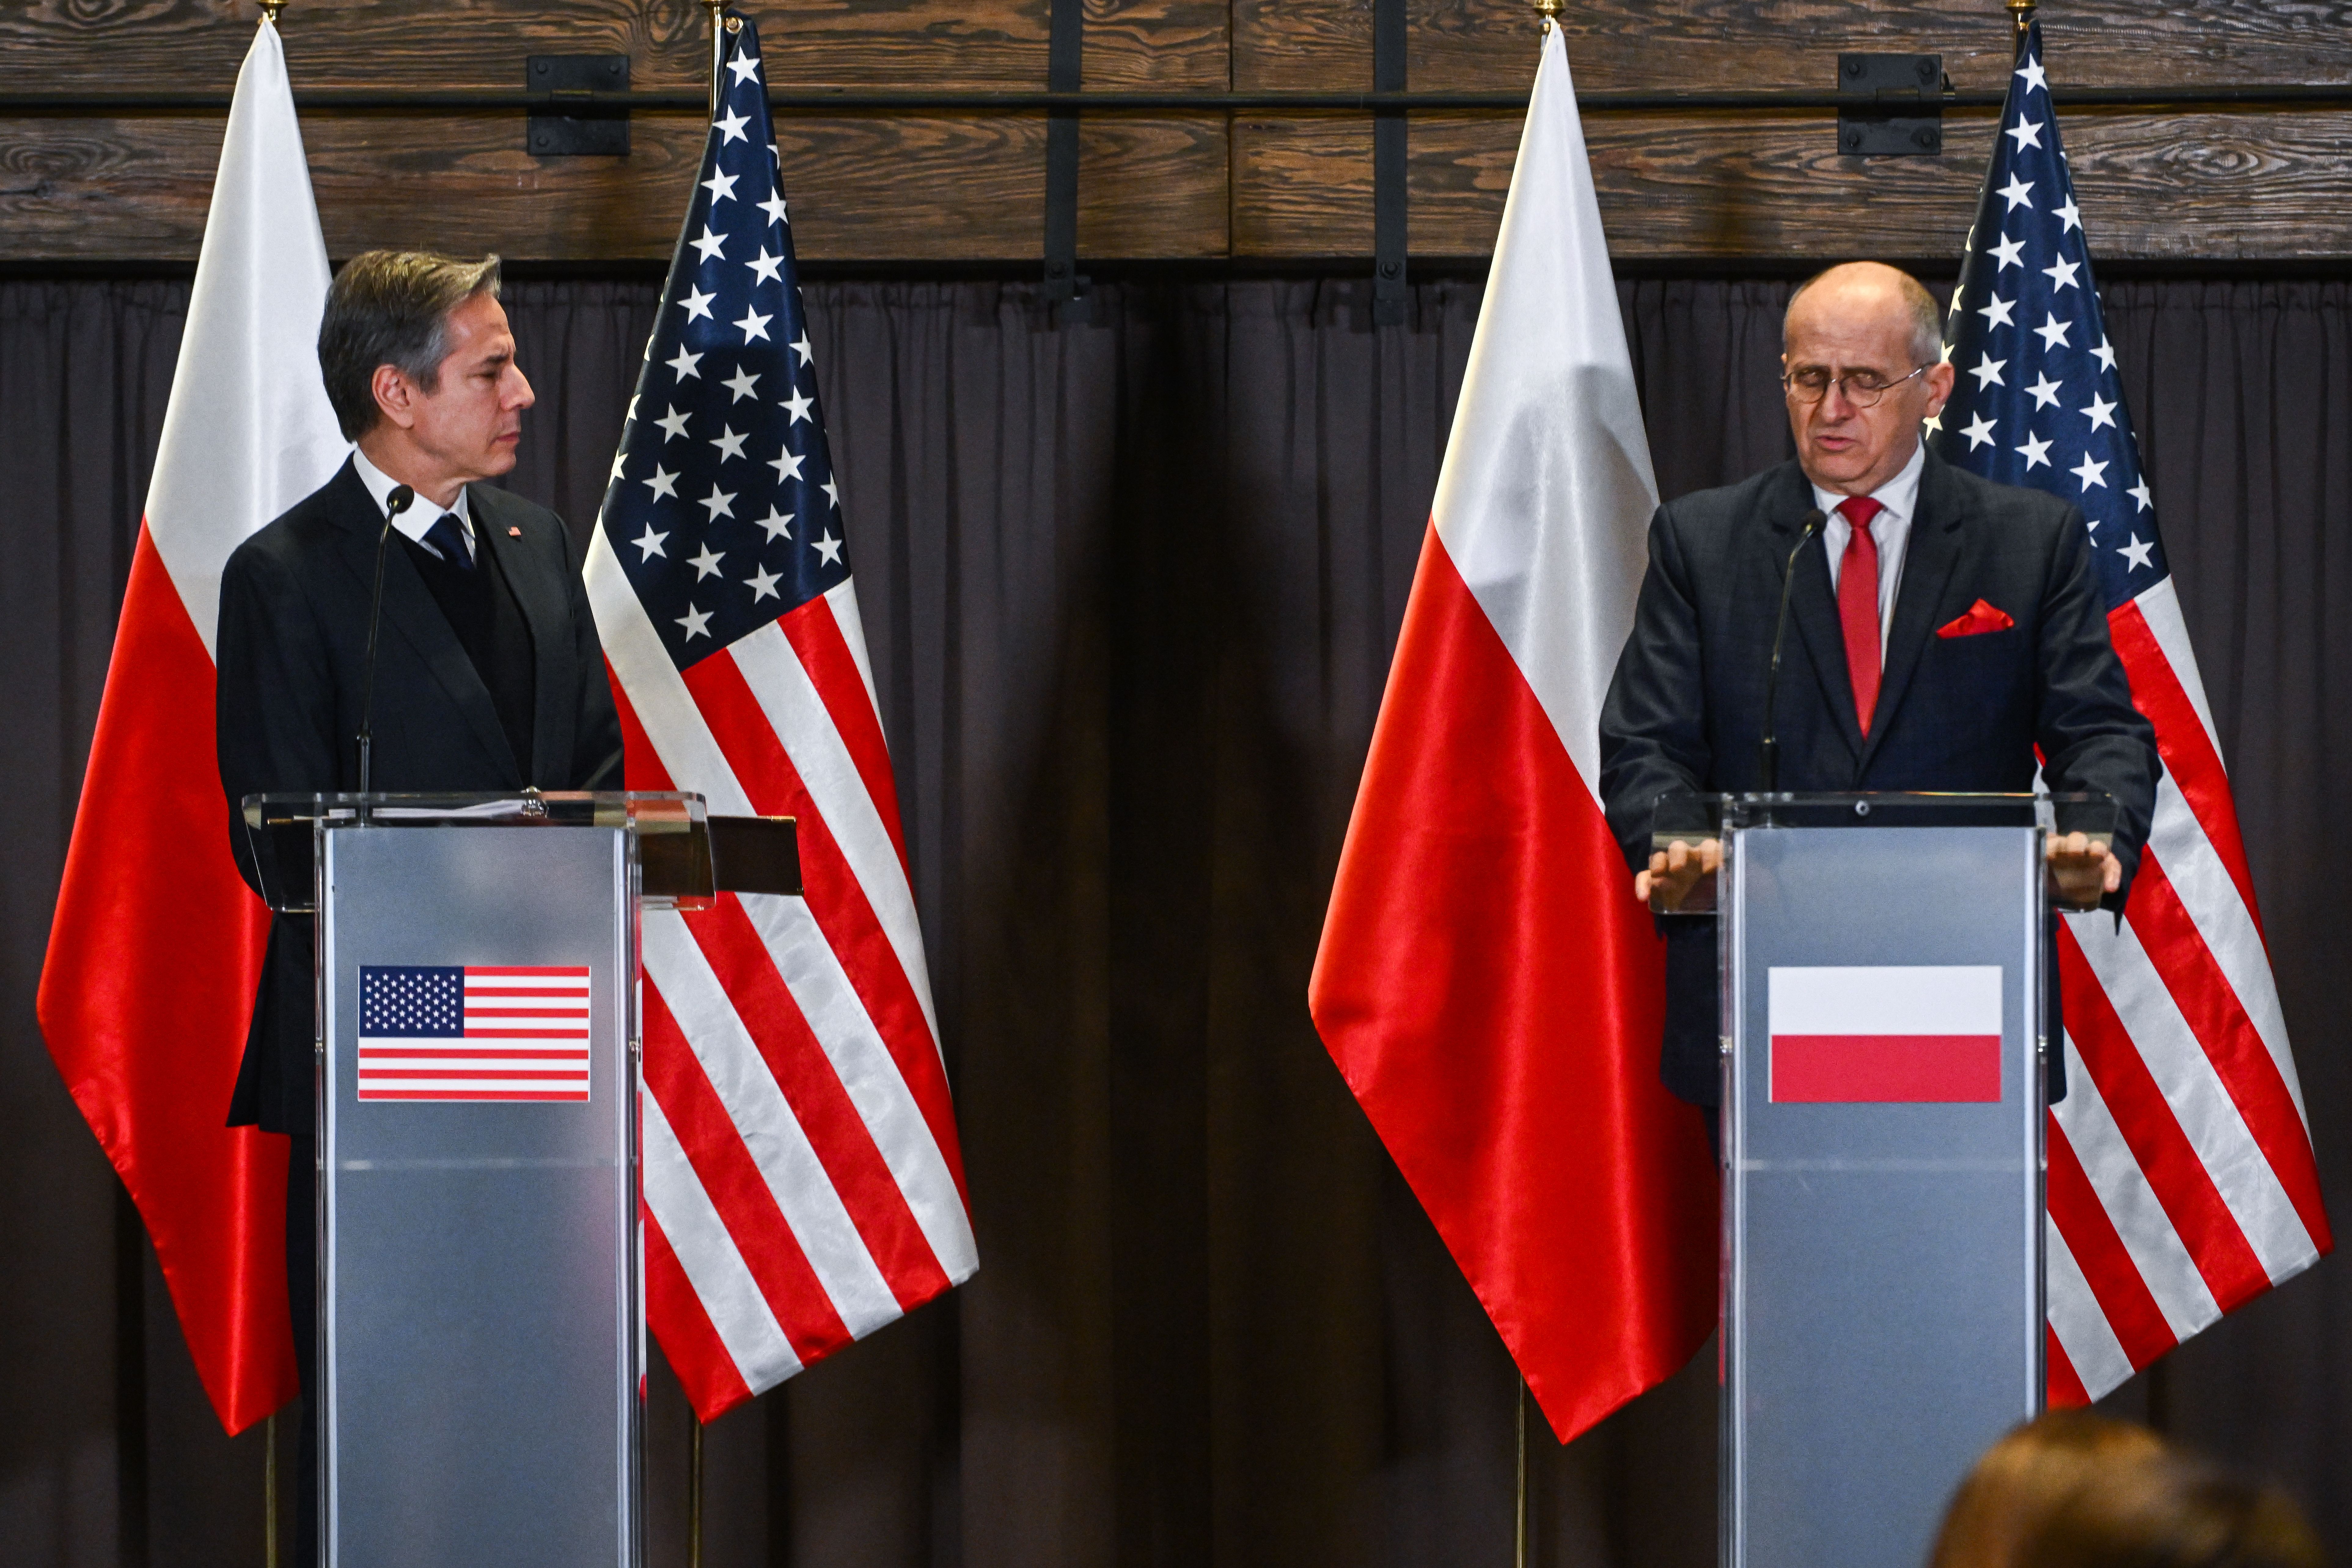 The United States Secretary of State, Antony Blinken (R) and Poland's Foreign Minister Zbigniew Rau (L) give a press statement at the Bristol Hotel on March 05, 2022 in Rzeszow, Poland